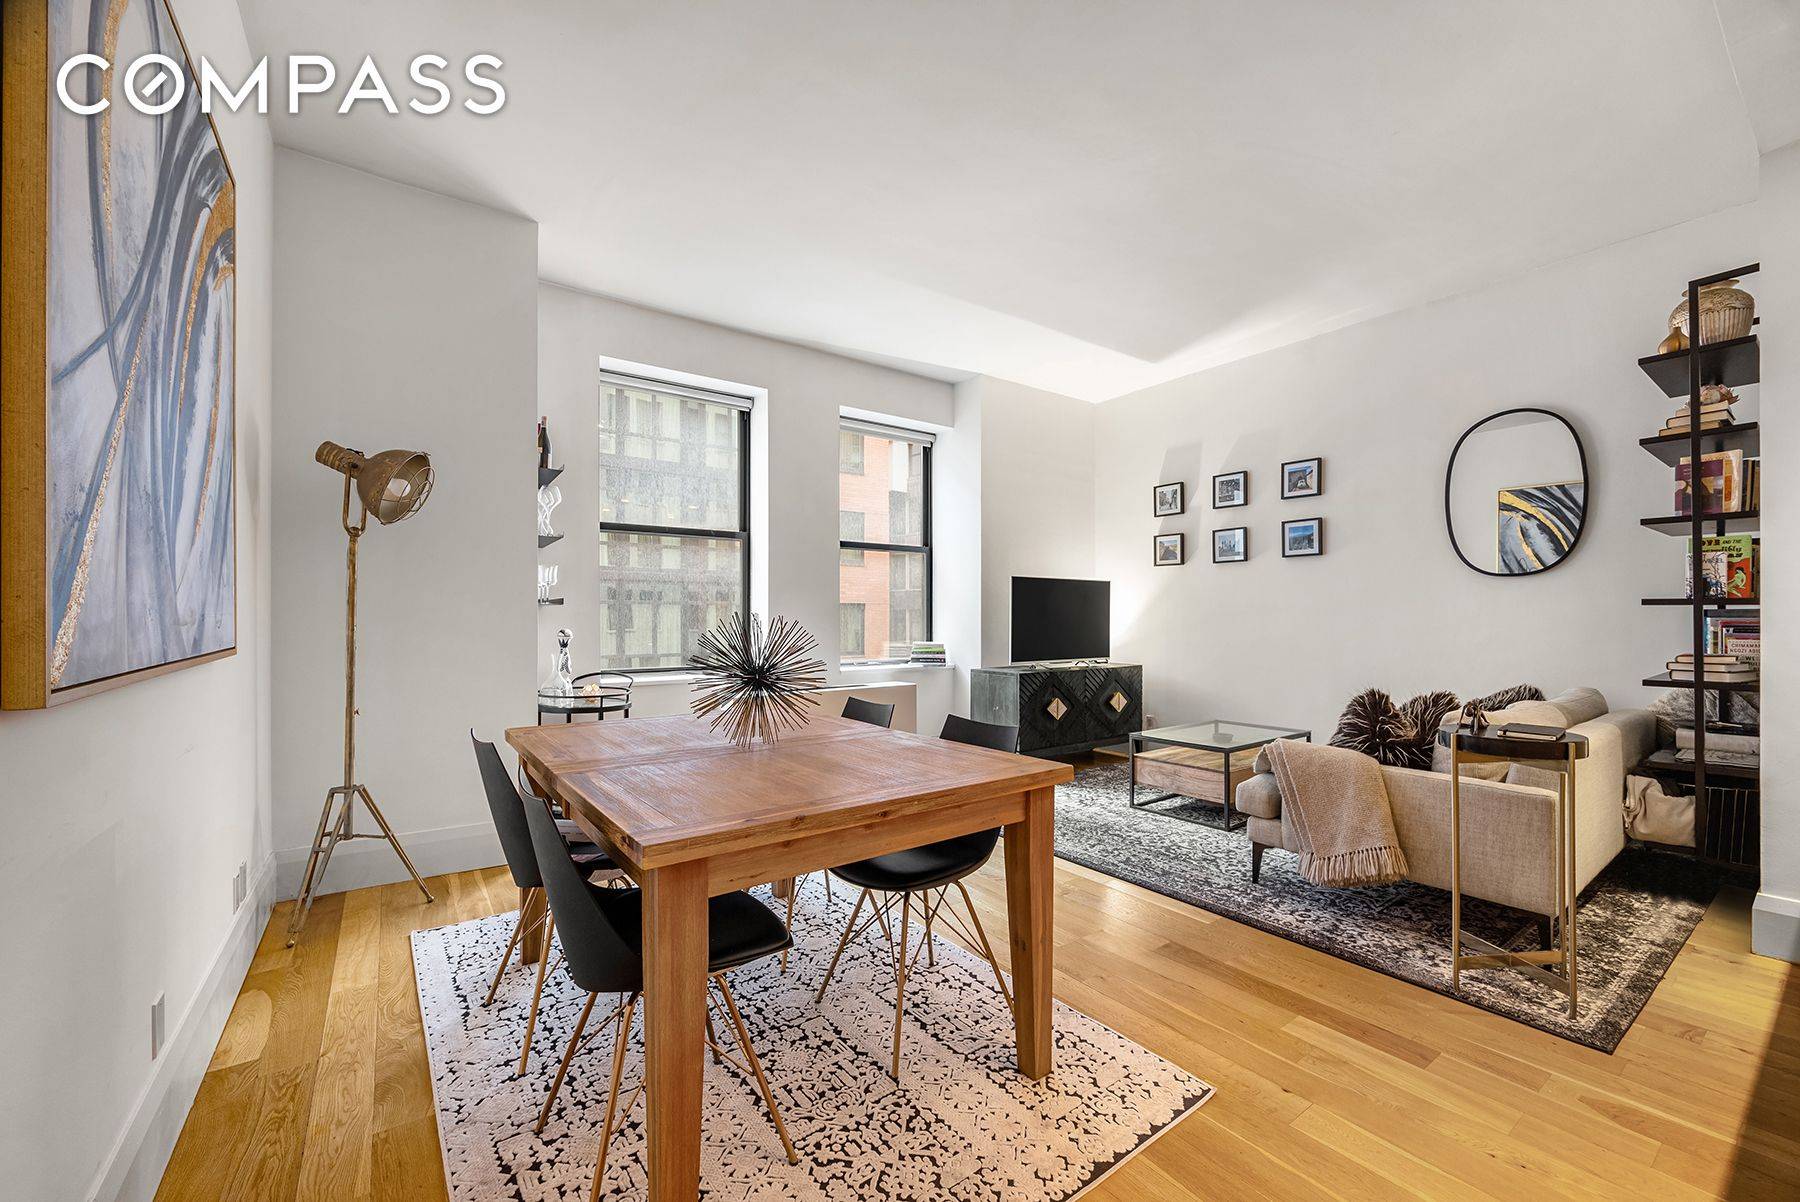 This beautiful loft like, one bedroom, one bath unit is located in the coveted prewar Croft Condominium.